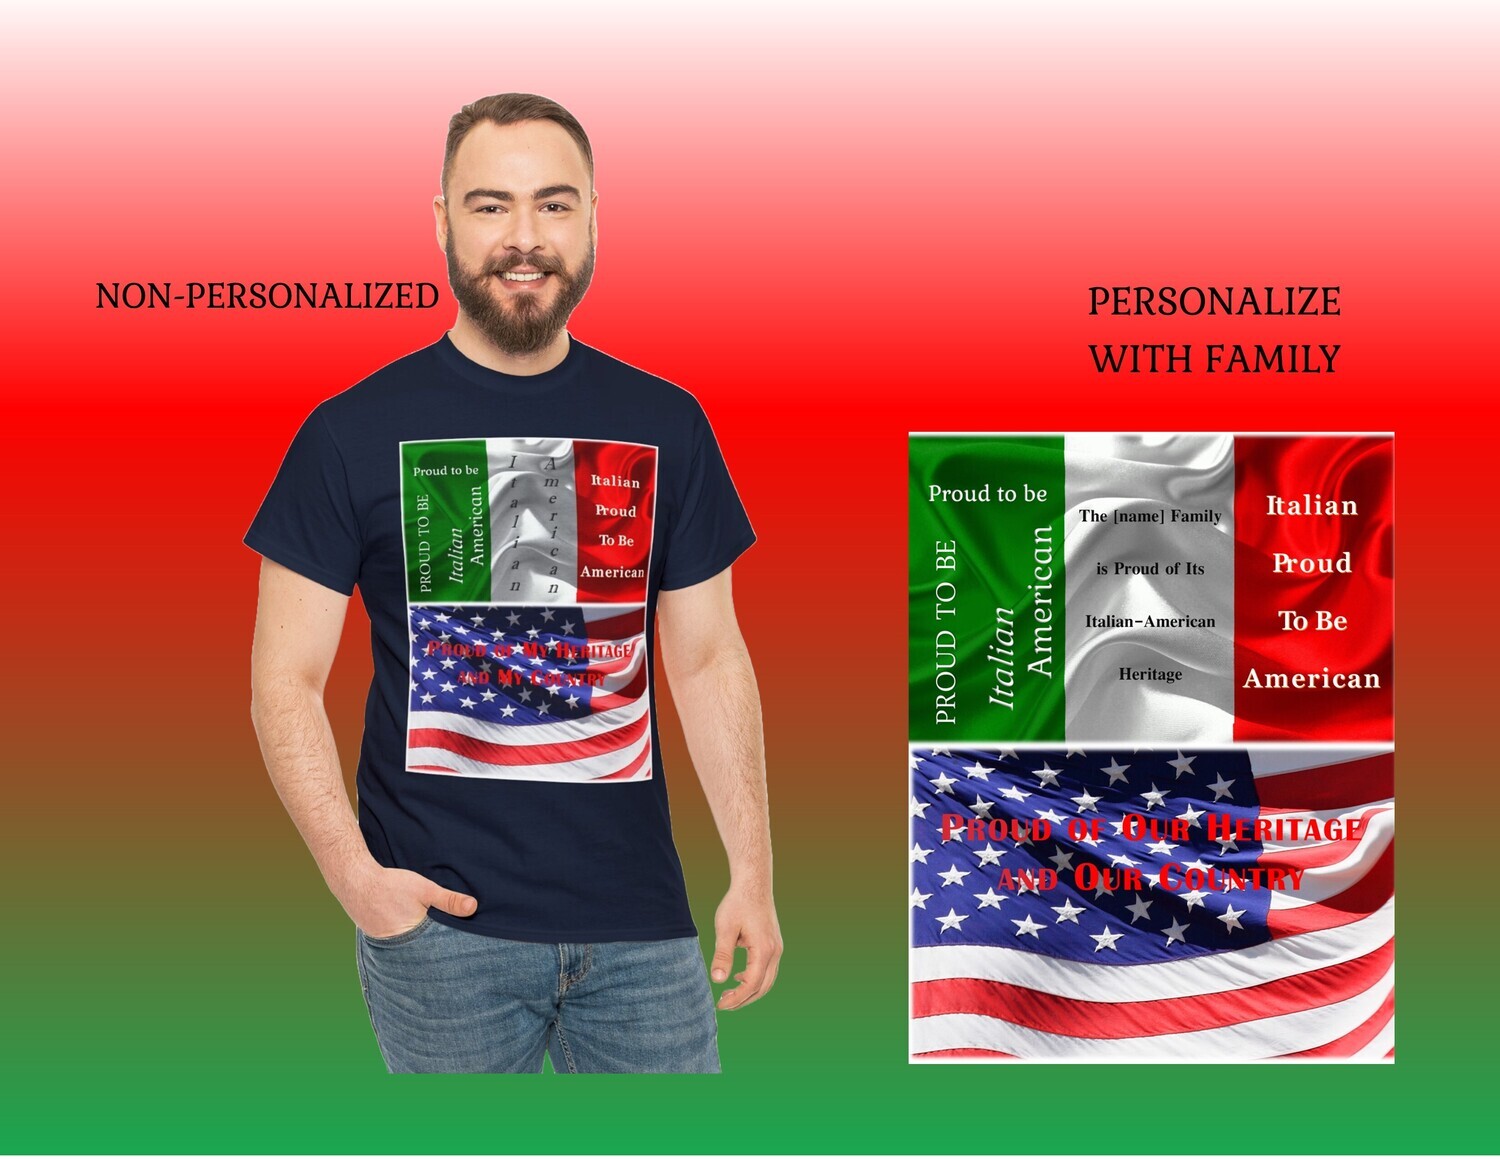 To Personalize or Not To Personalize - Italian American Heritage Collection Cotton Tees - Starting at $12.75